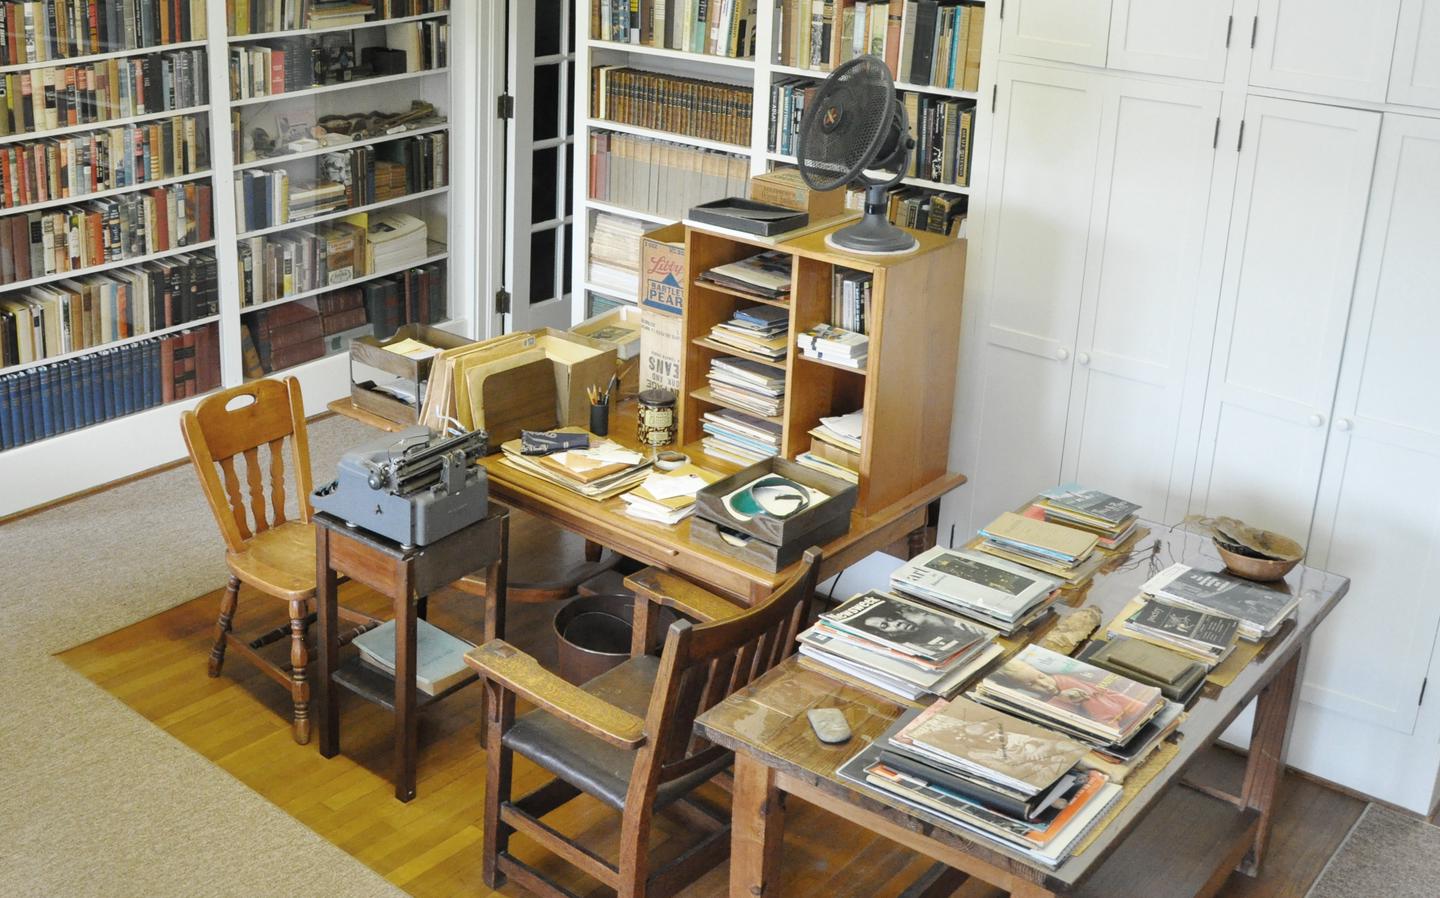 View of a room with desks and chairs and bookshelves lining the wallView of Sandburg's Correspondence Office